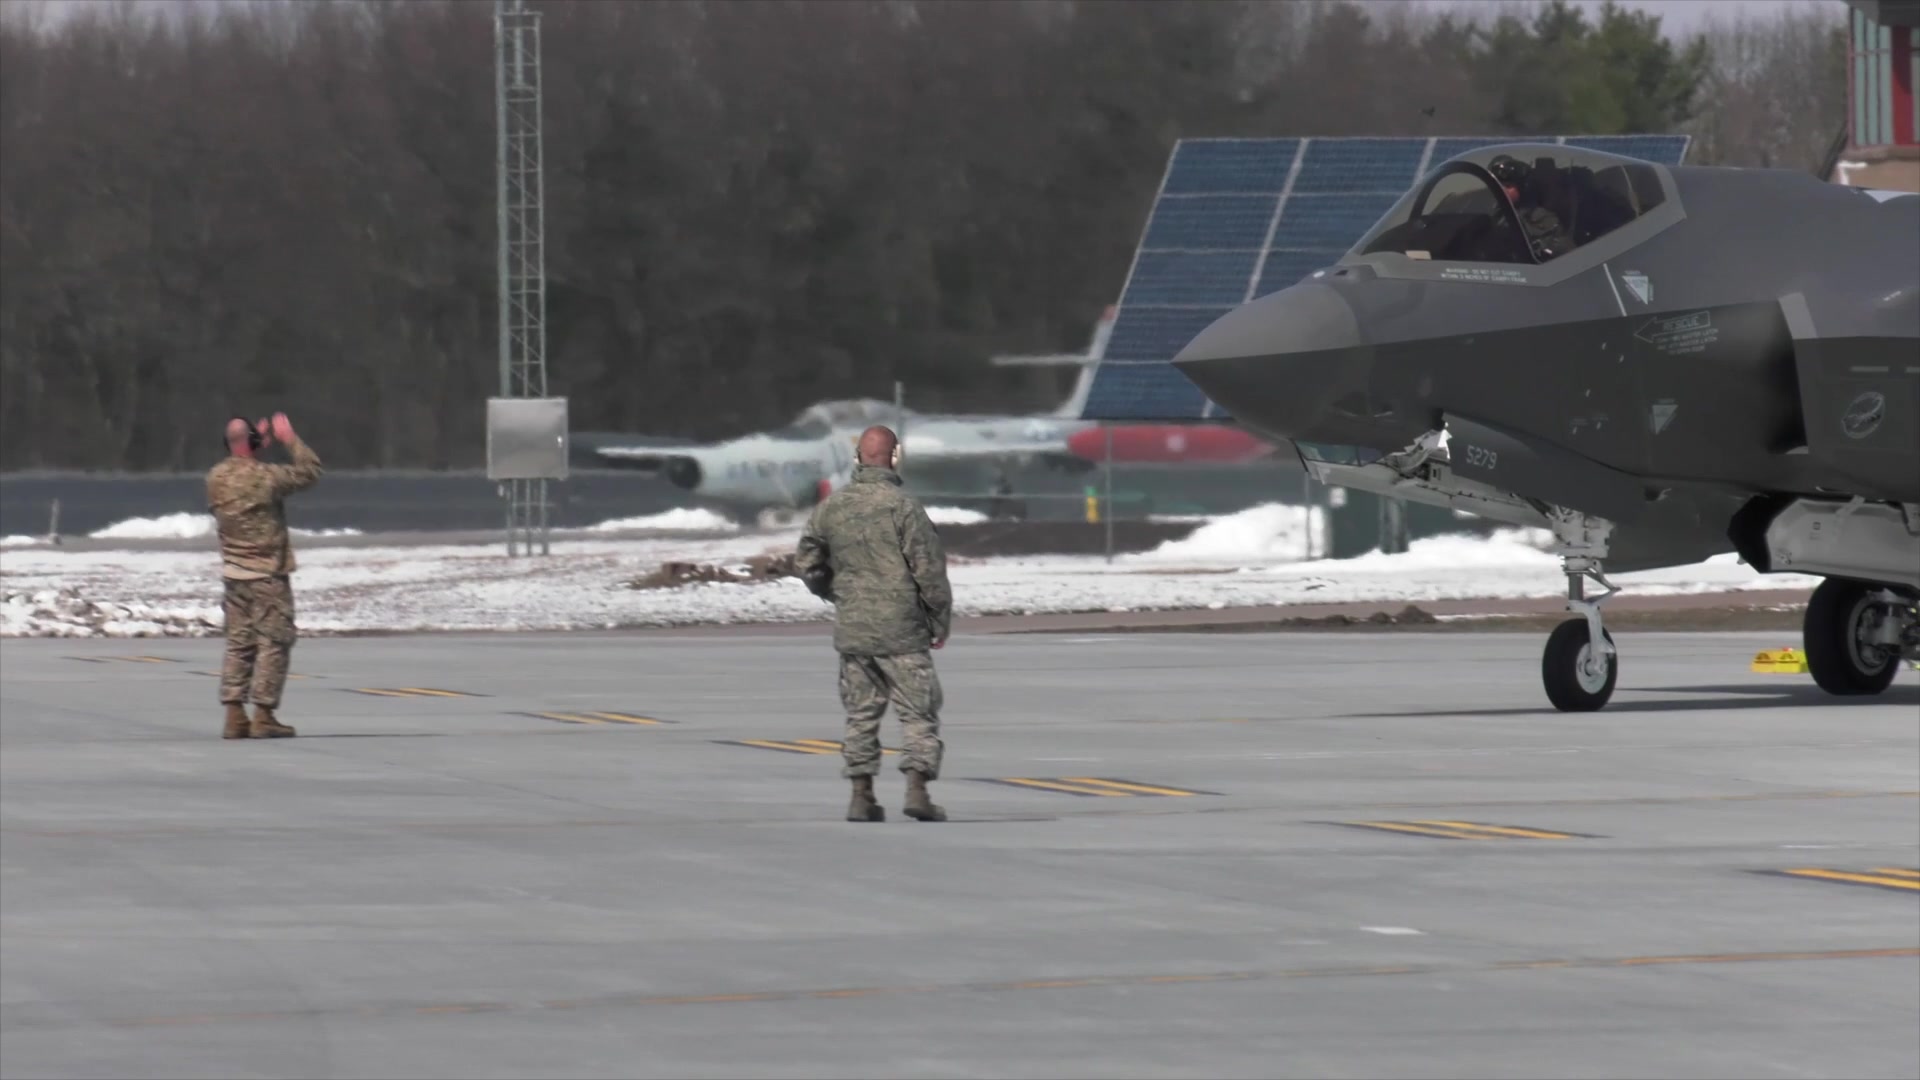 From our Green Mountain Boys returning from Southern Lightning, to our Airmen assisting with building a 400-bed Medical Health Facility, the Vermont Air National Guard has been fully involved in our community responding to the COVID-19 pandemic, while maintaining our readiness for our nation.